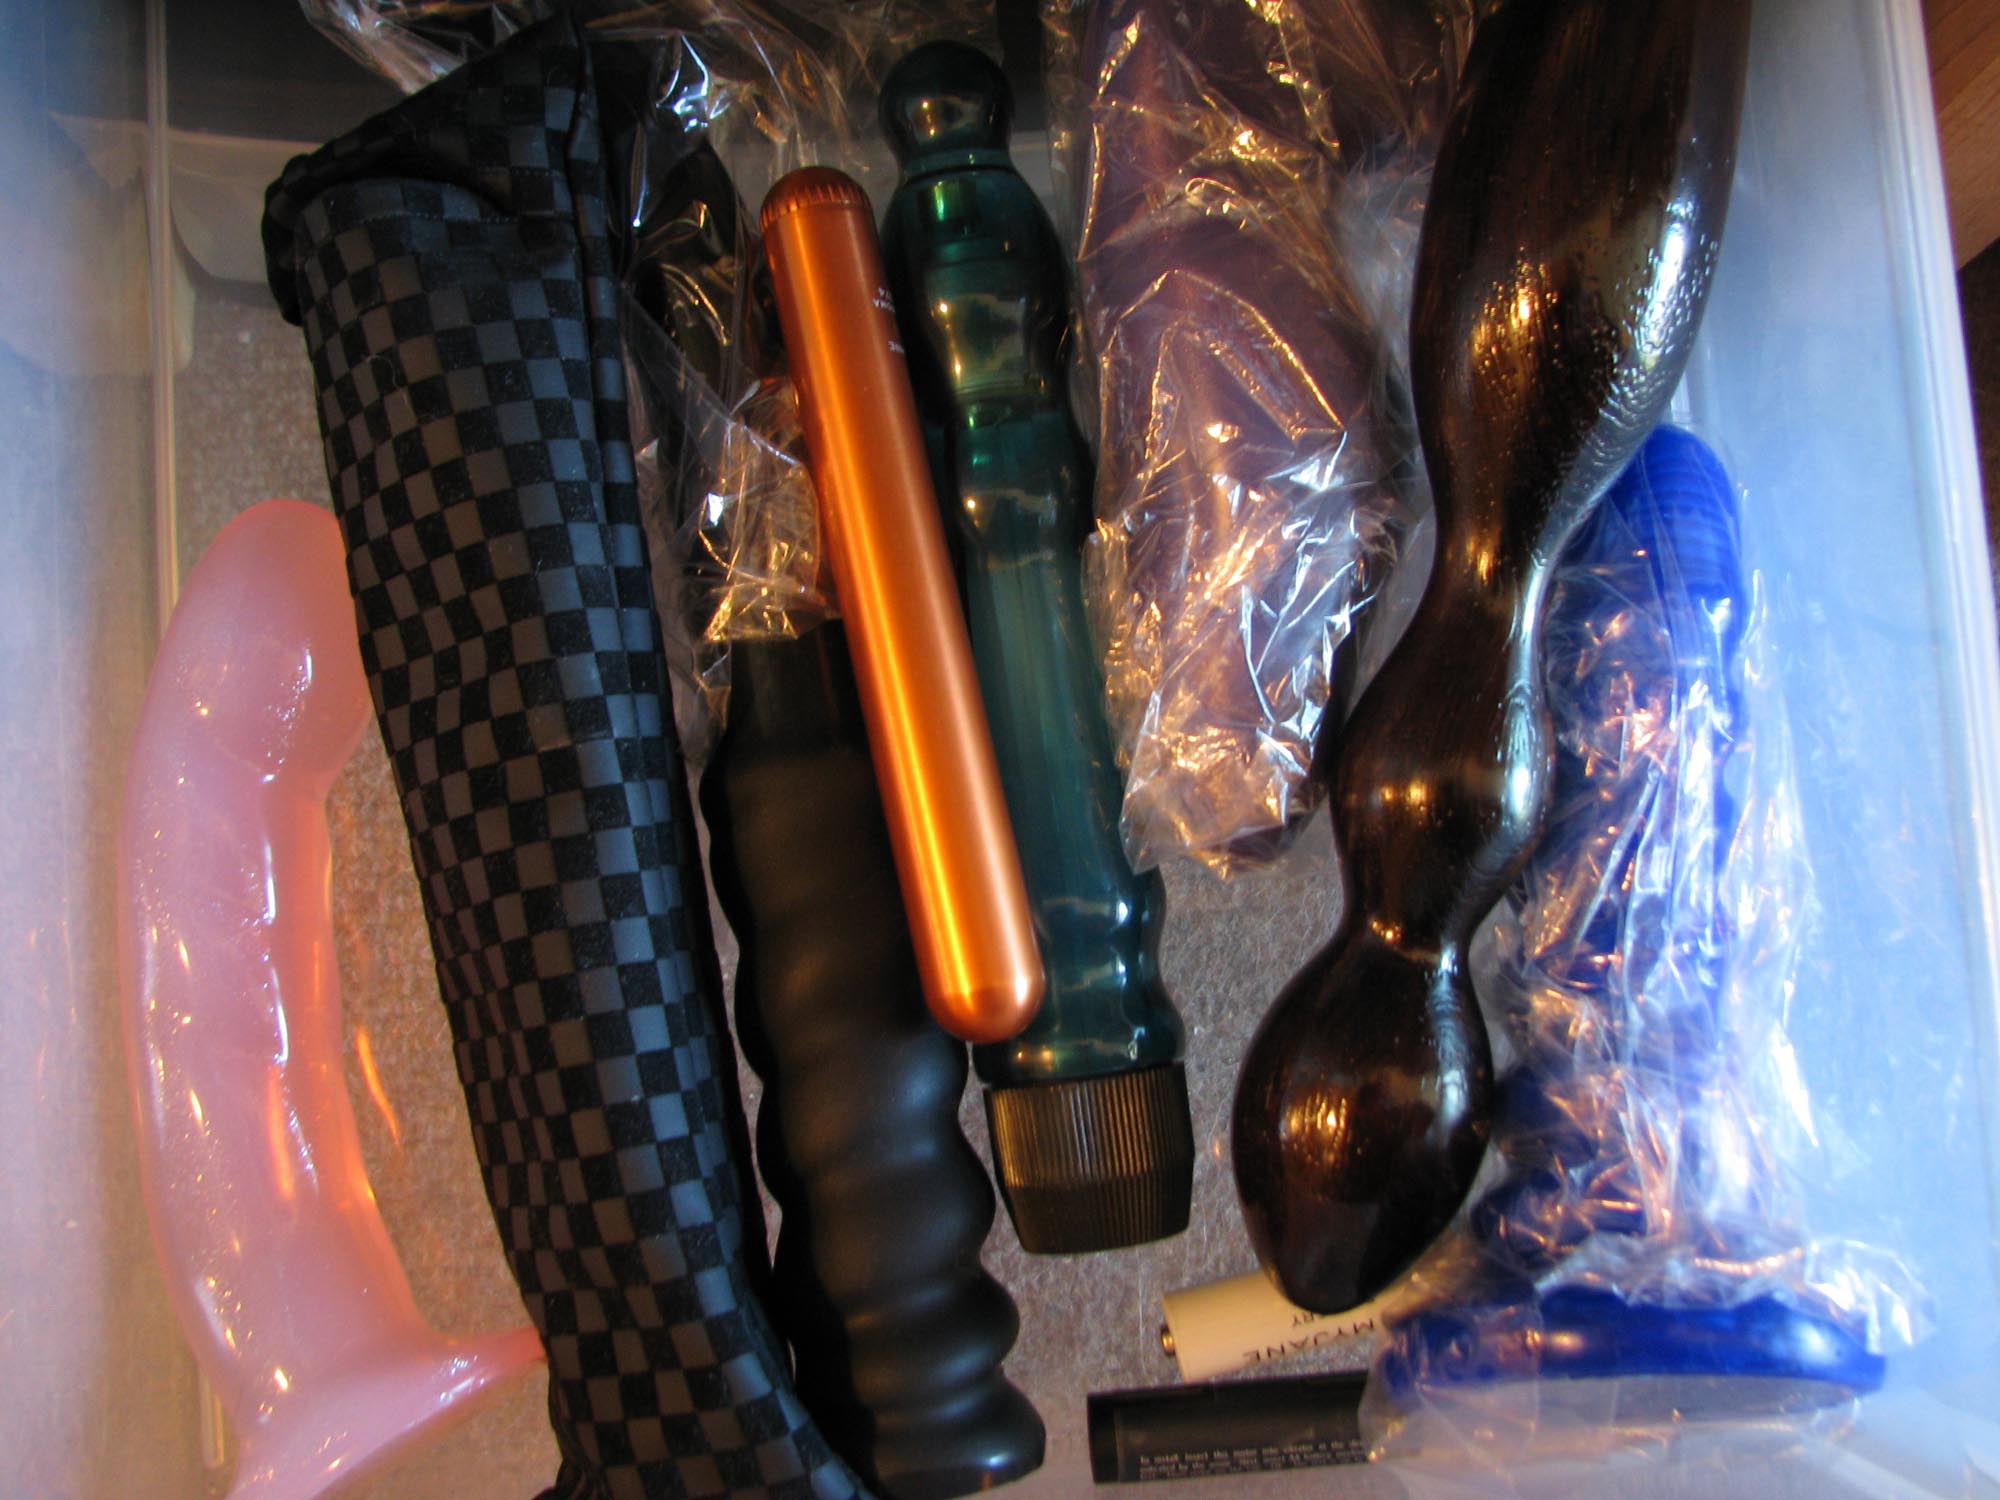 Drawer of confliction. Sex toys I'm not sure about.